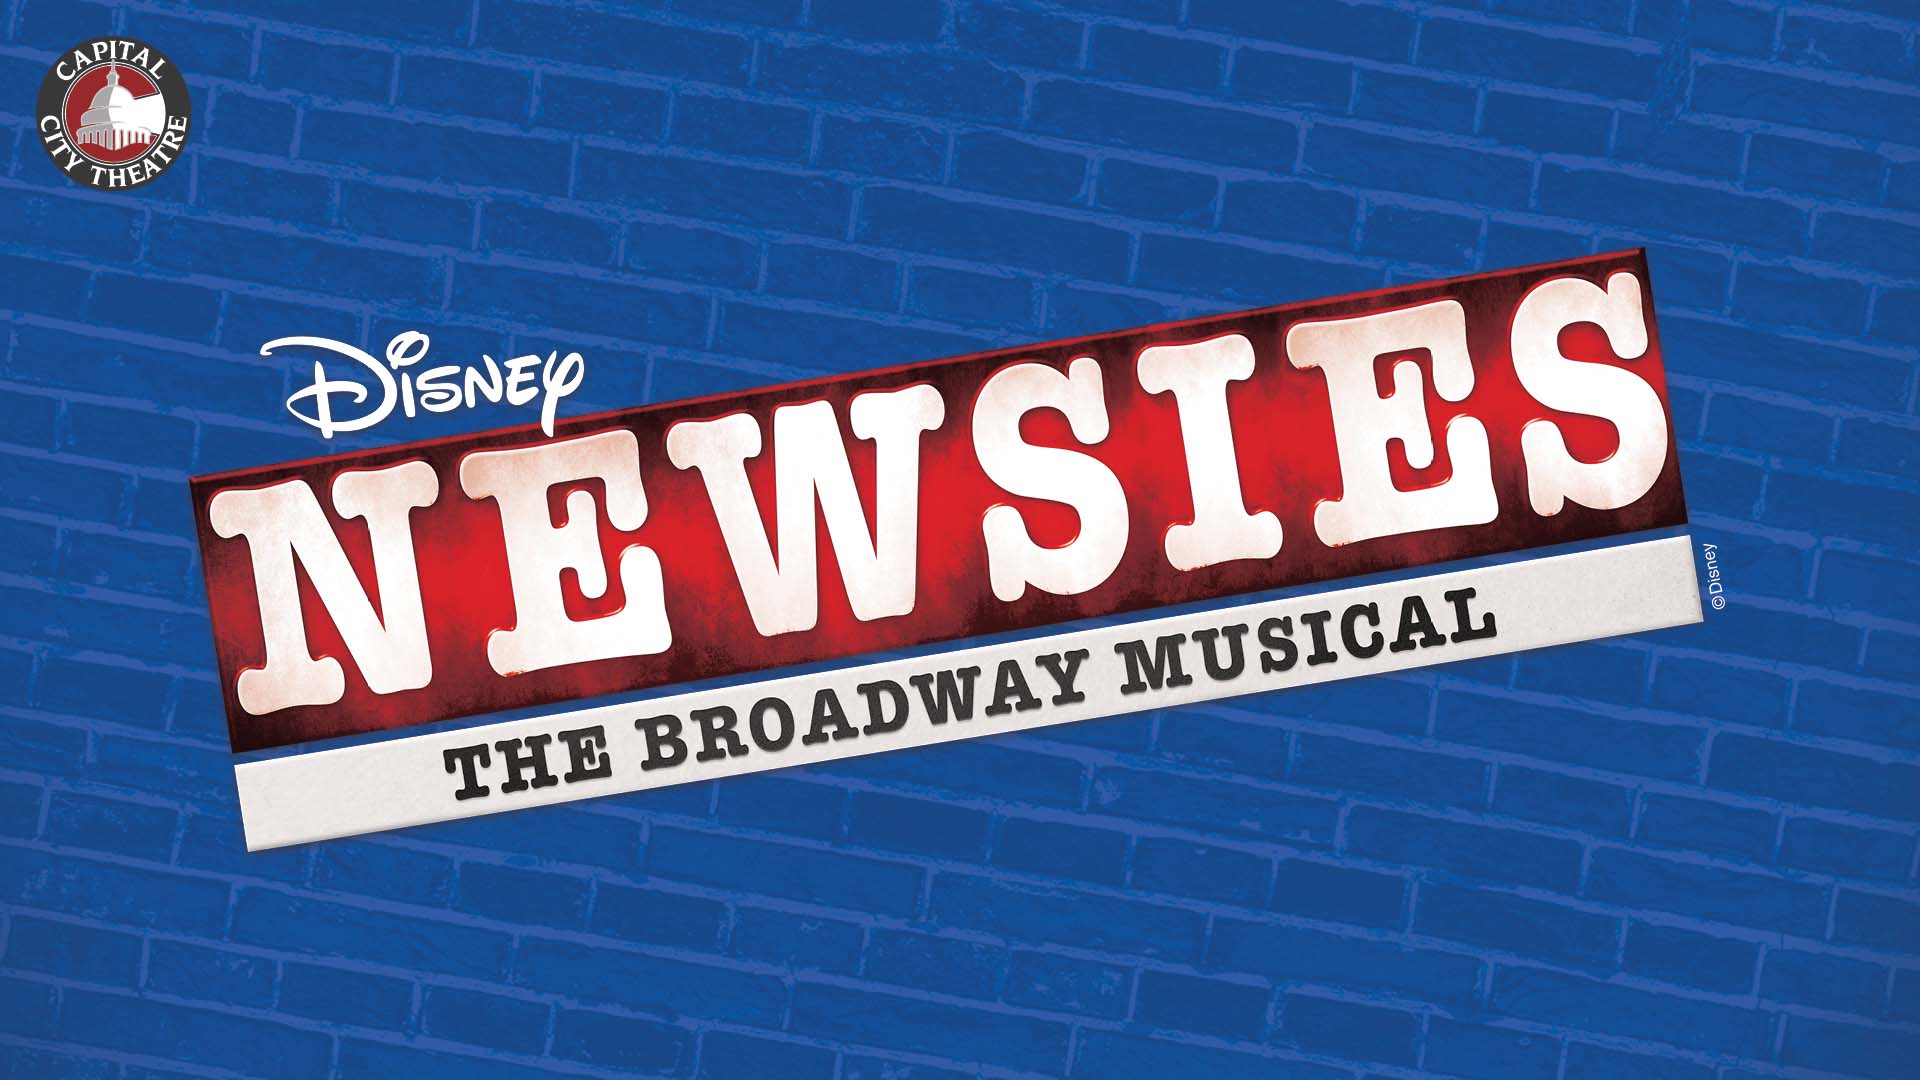 Capital City Theatre Disney Newsies The Broadway Musical Overture